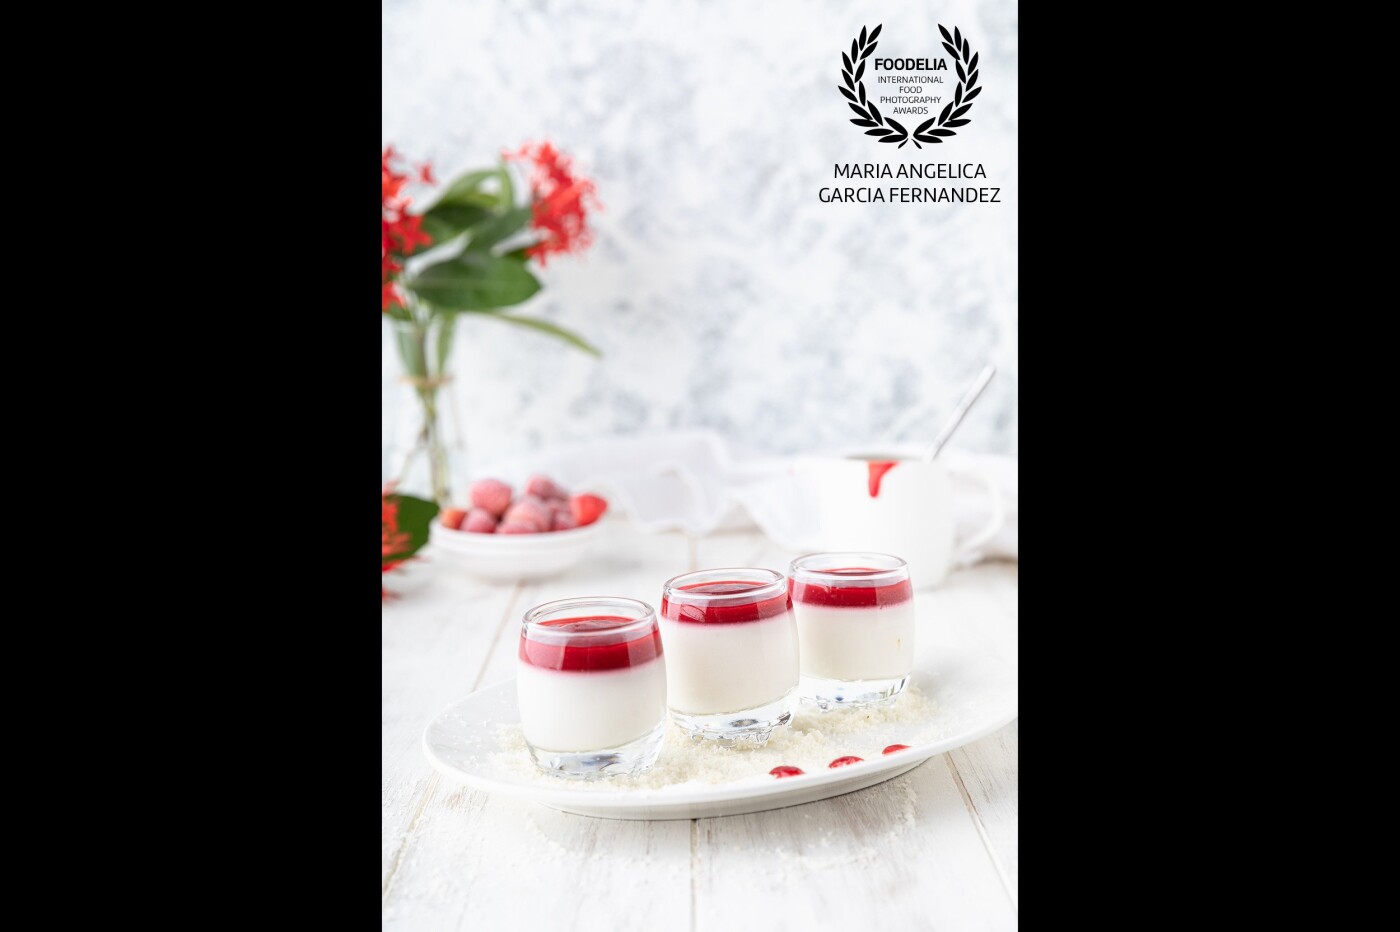 This is the perfect dessert for summer. My version of Lactose-Free Panna cotta ( Italian for "cooked cream"), served with strawberry and raspberry coulis.